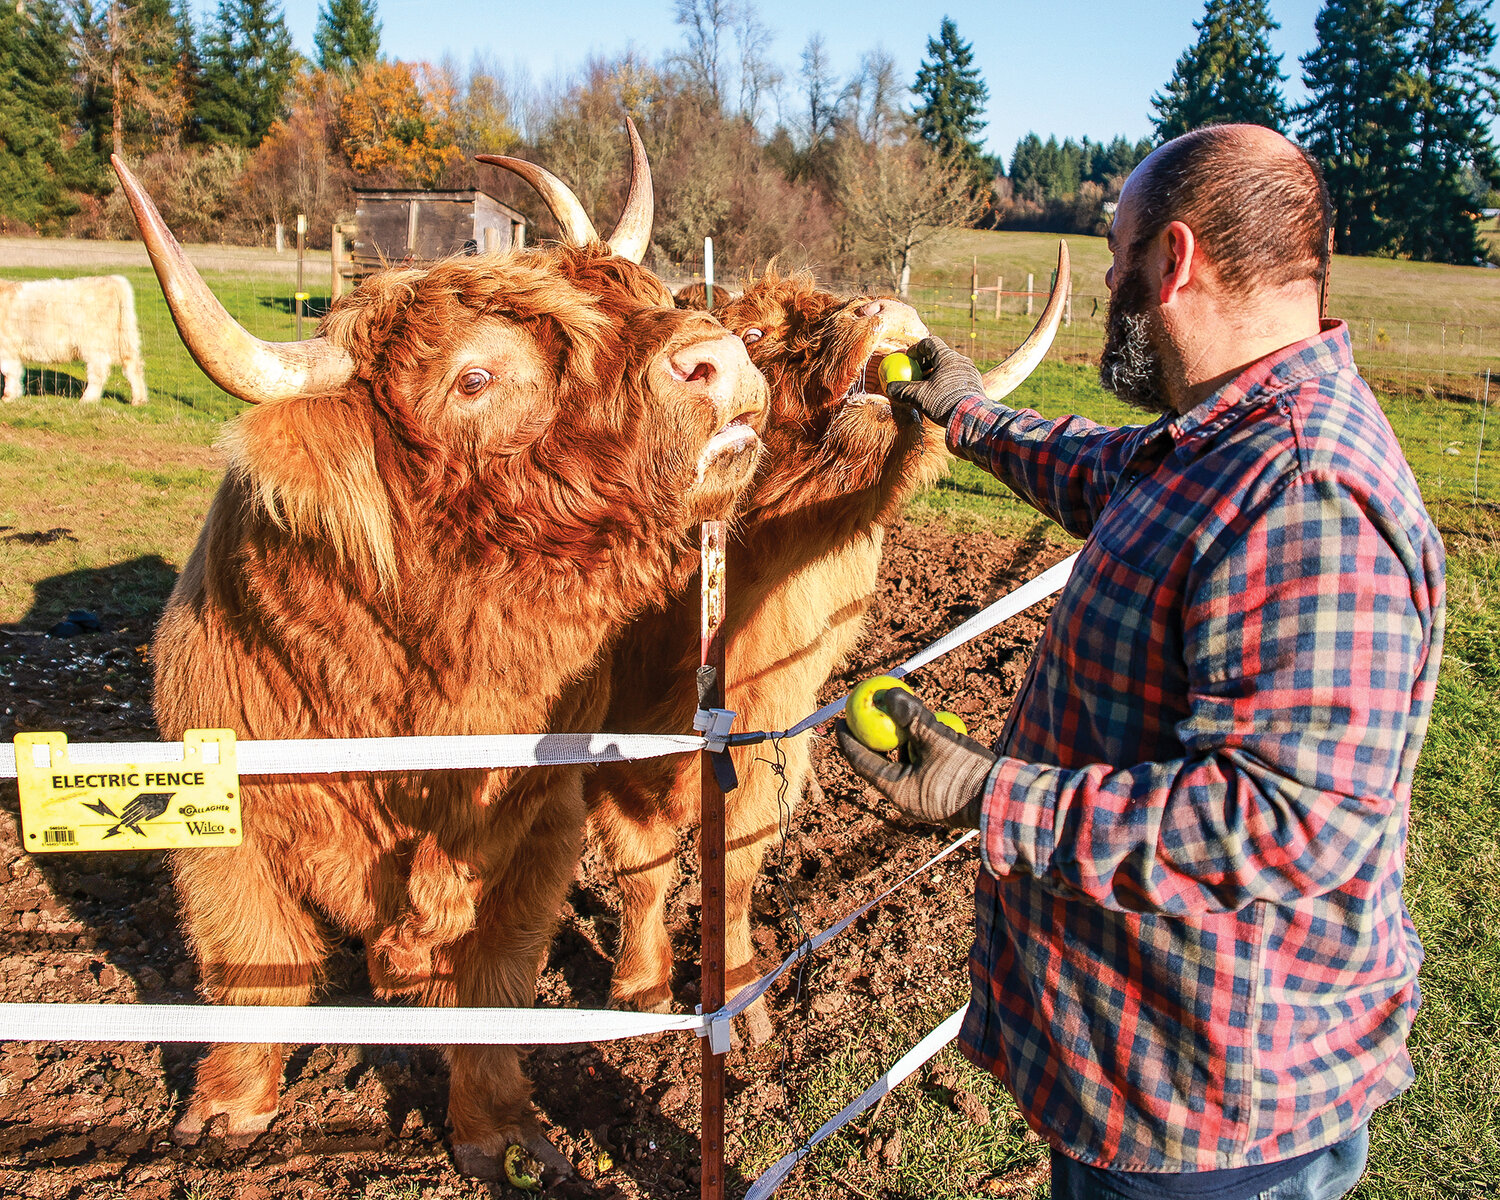 Mark Lopez, owner of Gather and Feast Farm in La Center, feeds one of his Highland cows on Tuesday, Nov. 28. The Highland cows are also known as a “coo” in the old Scottish language. 